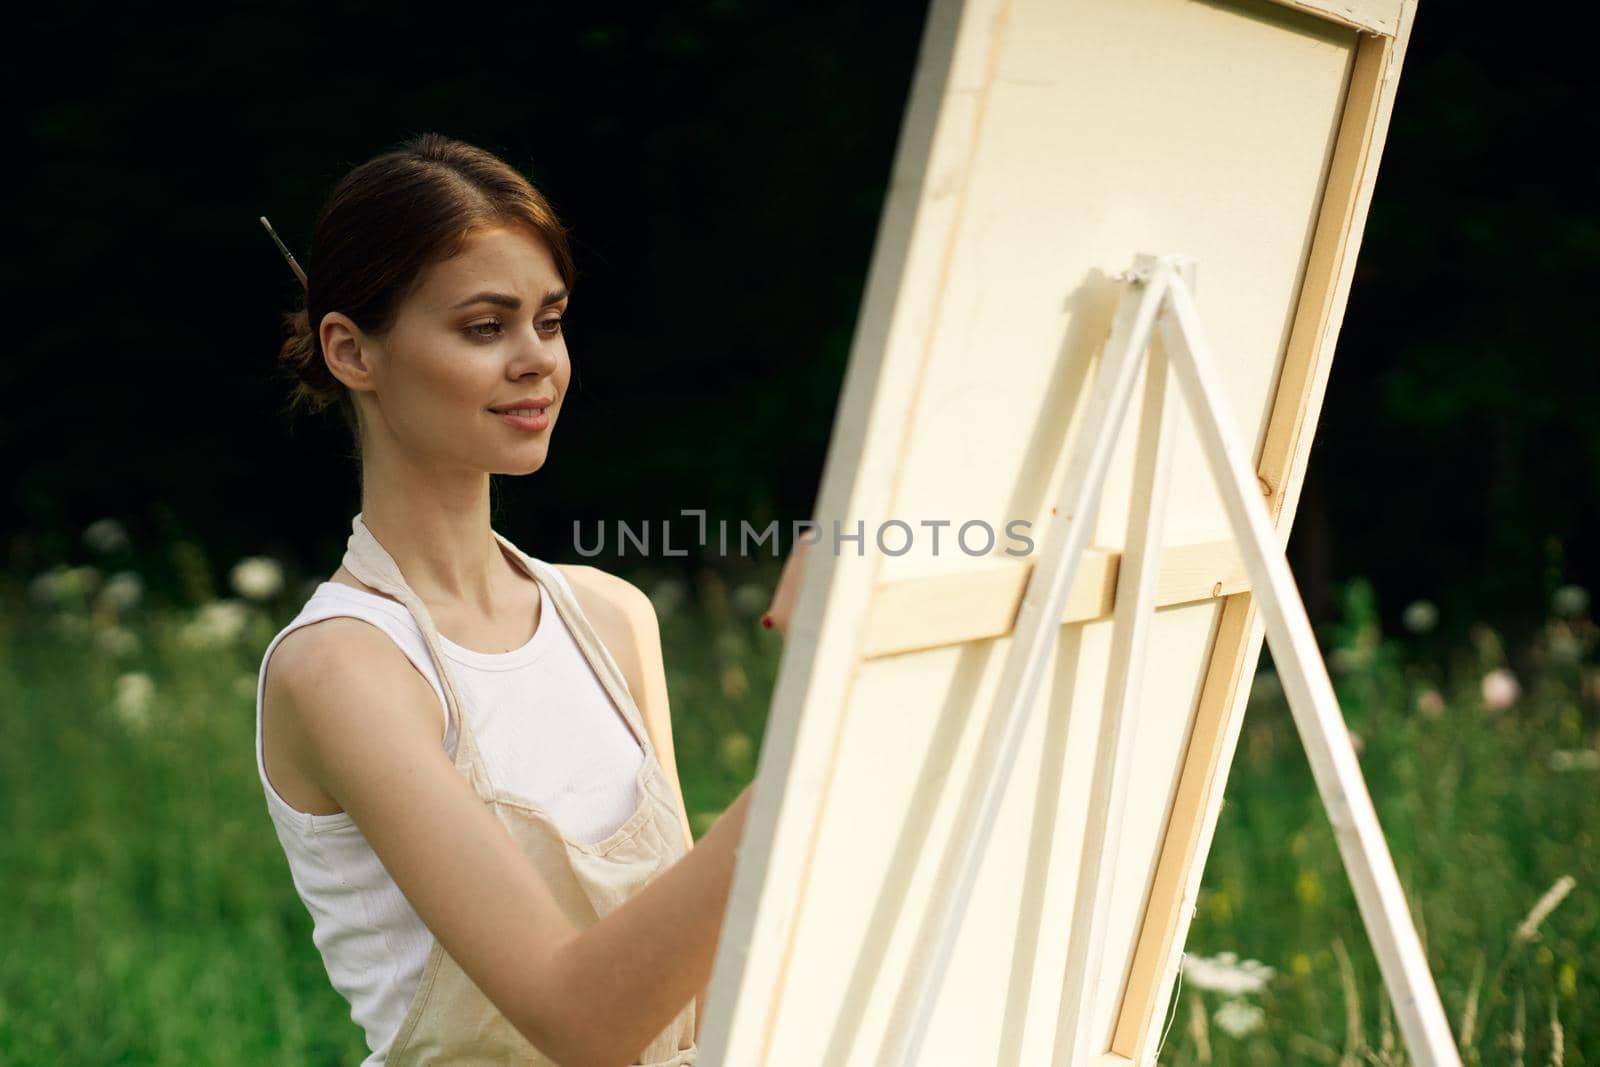 woman artist paints a picture near easel outdoors landscape creative. High quality photo